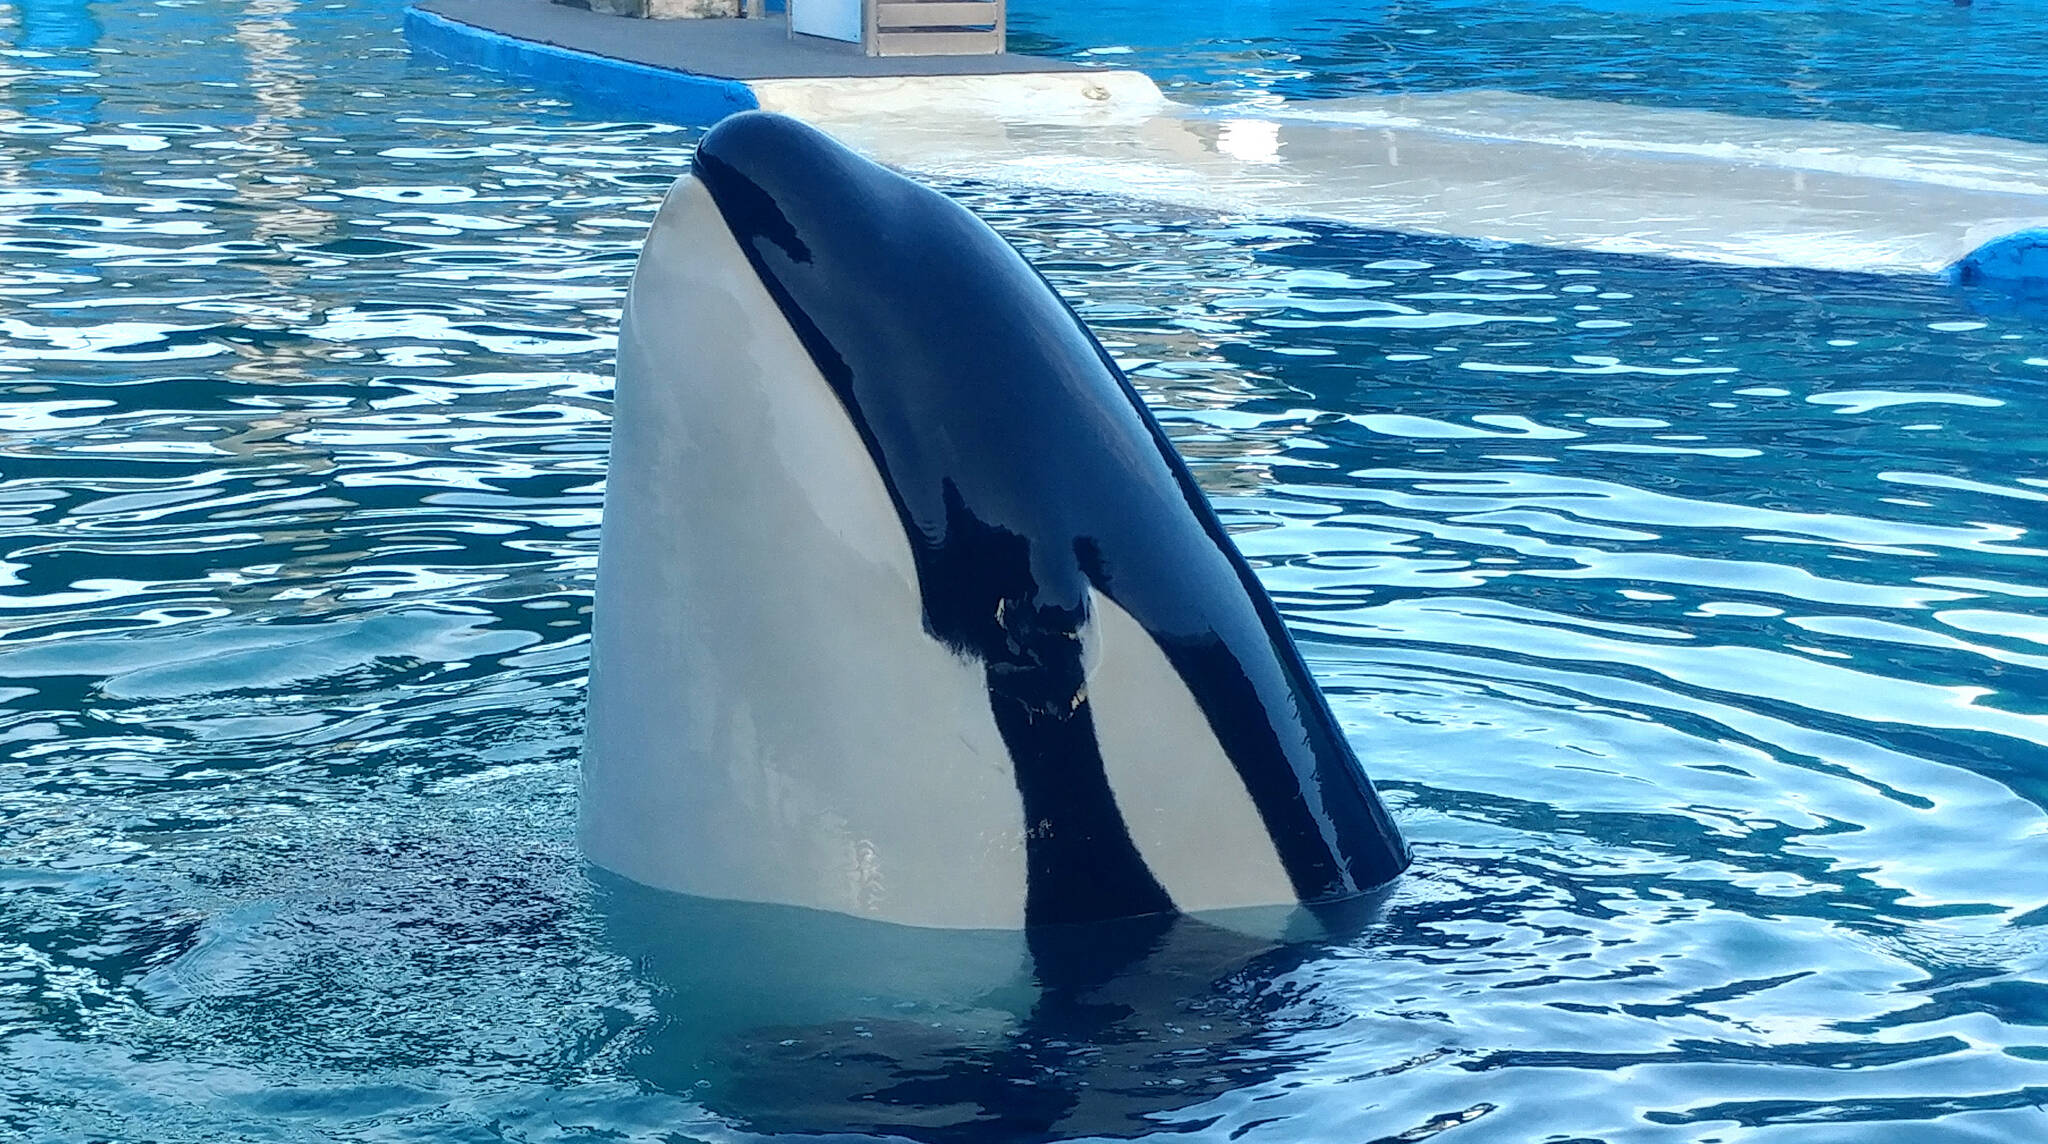 Photo by Rachael Andersen 
Lolita, pictured here in 2020, has been performing at the Miami Seaquarium for decades.